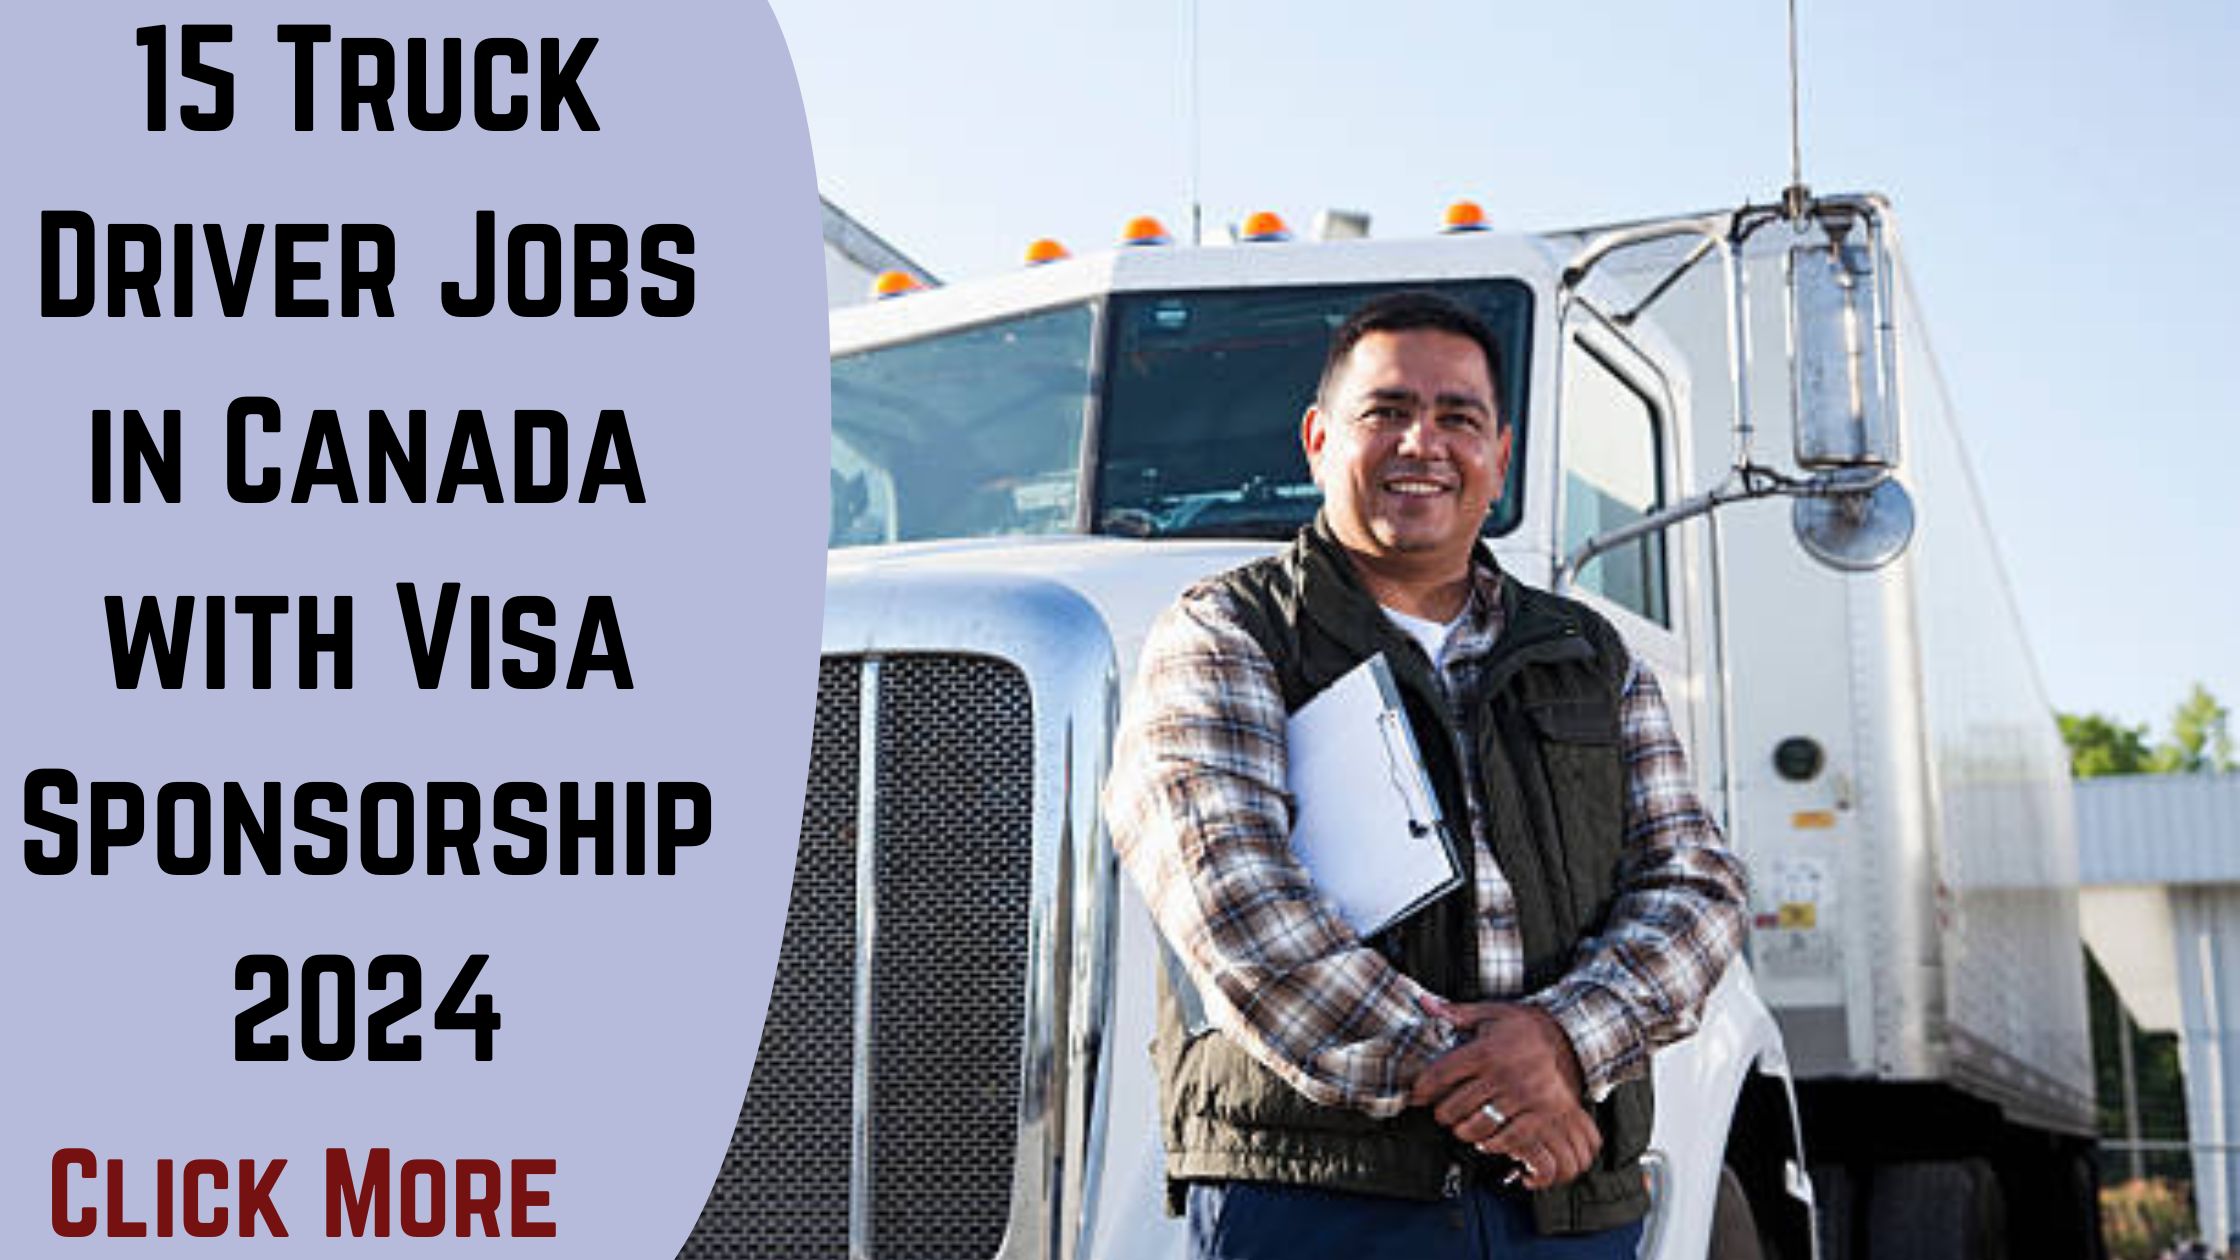 truck driver jobs in canada with visa sponsorship